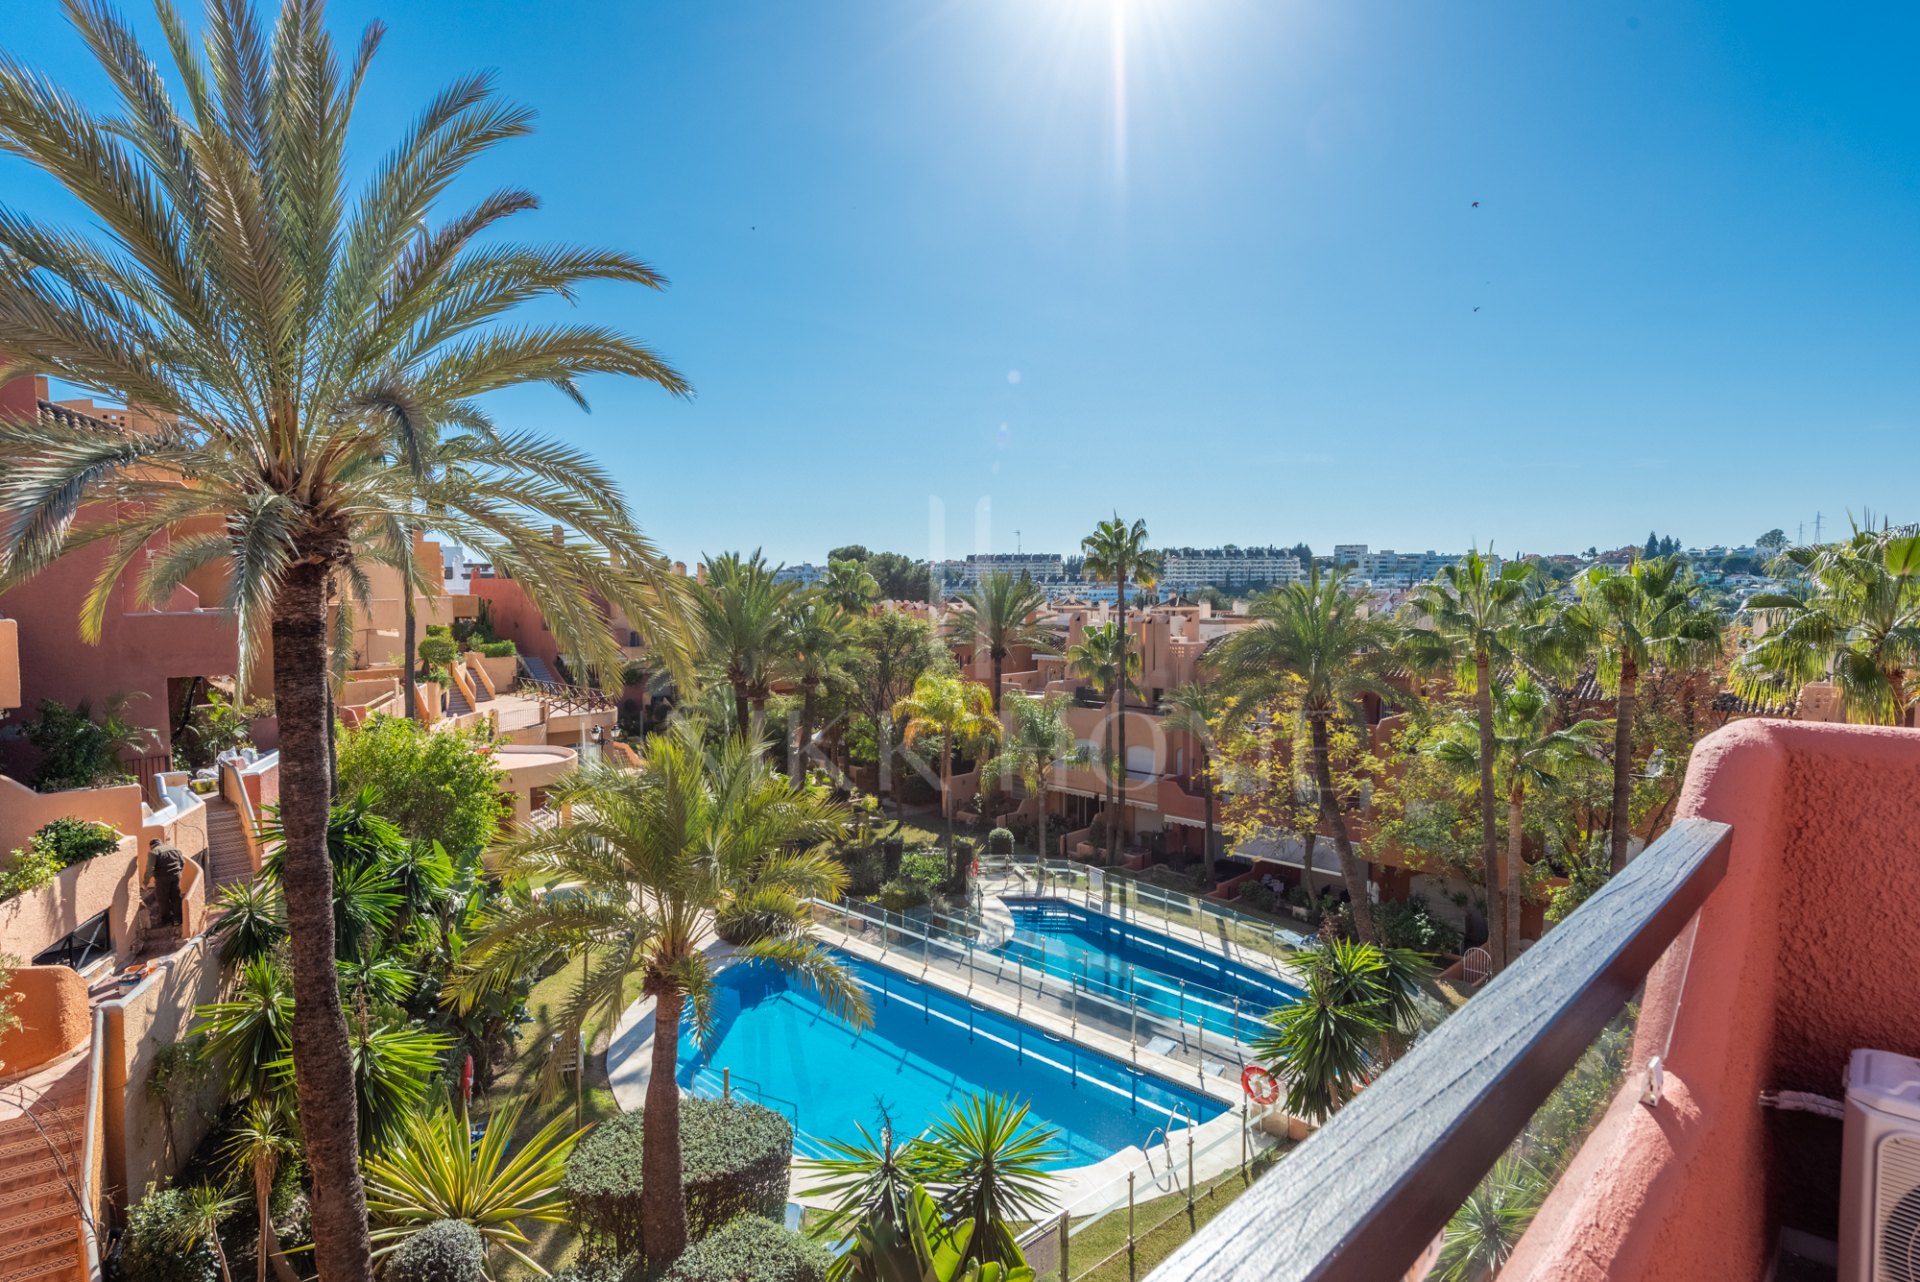 Spacious townhouse in a very good position within the established urbanisation of El Palmeral in Nueva Andalucia.